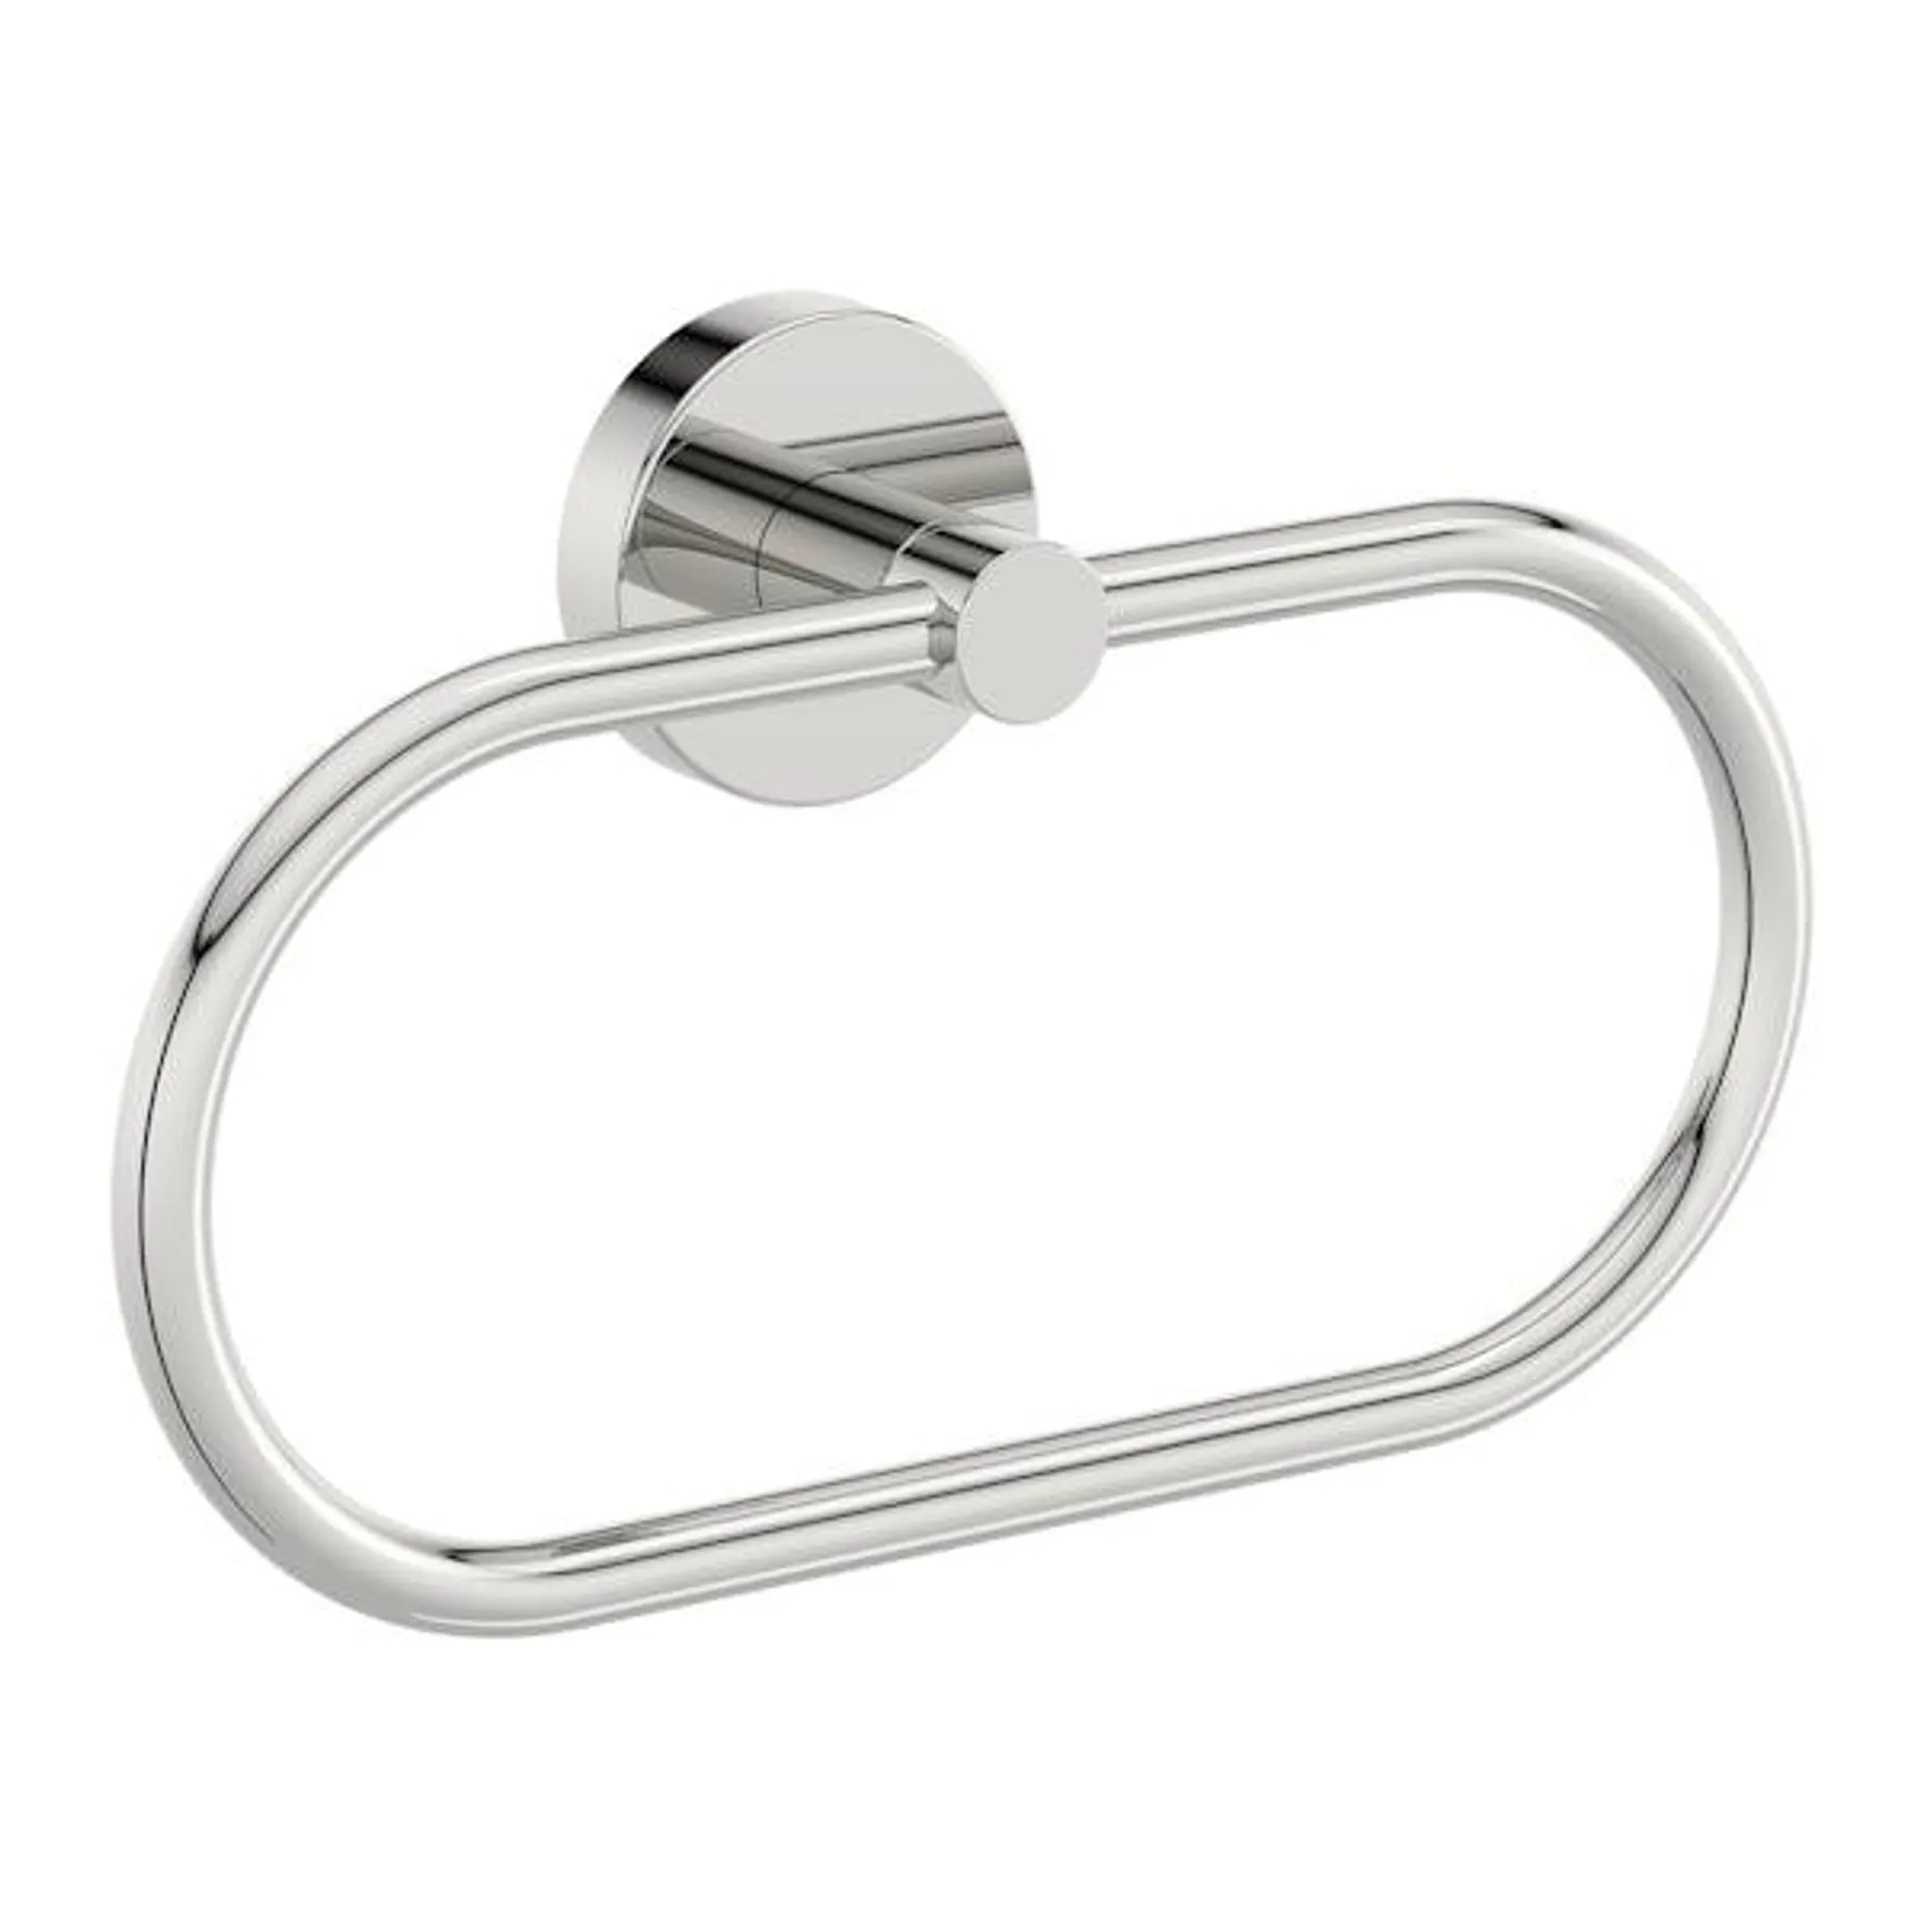 Accents Lunar towel ring